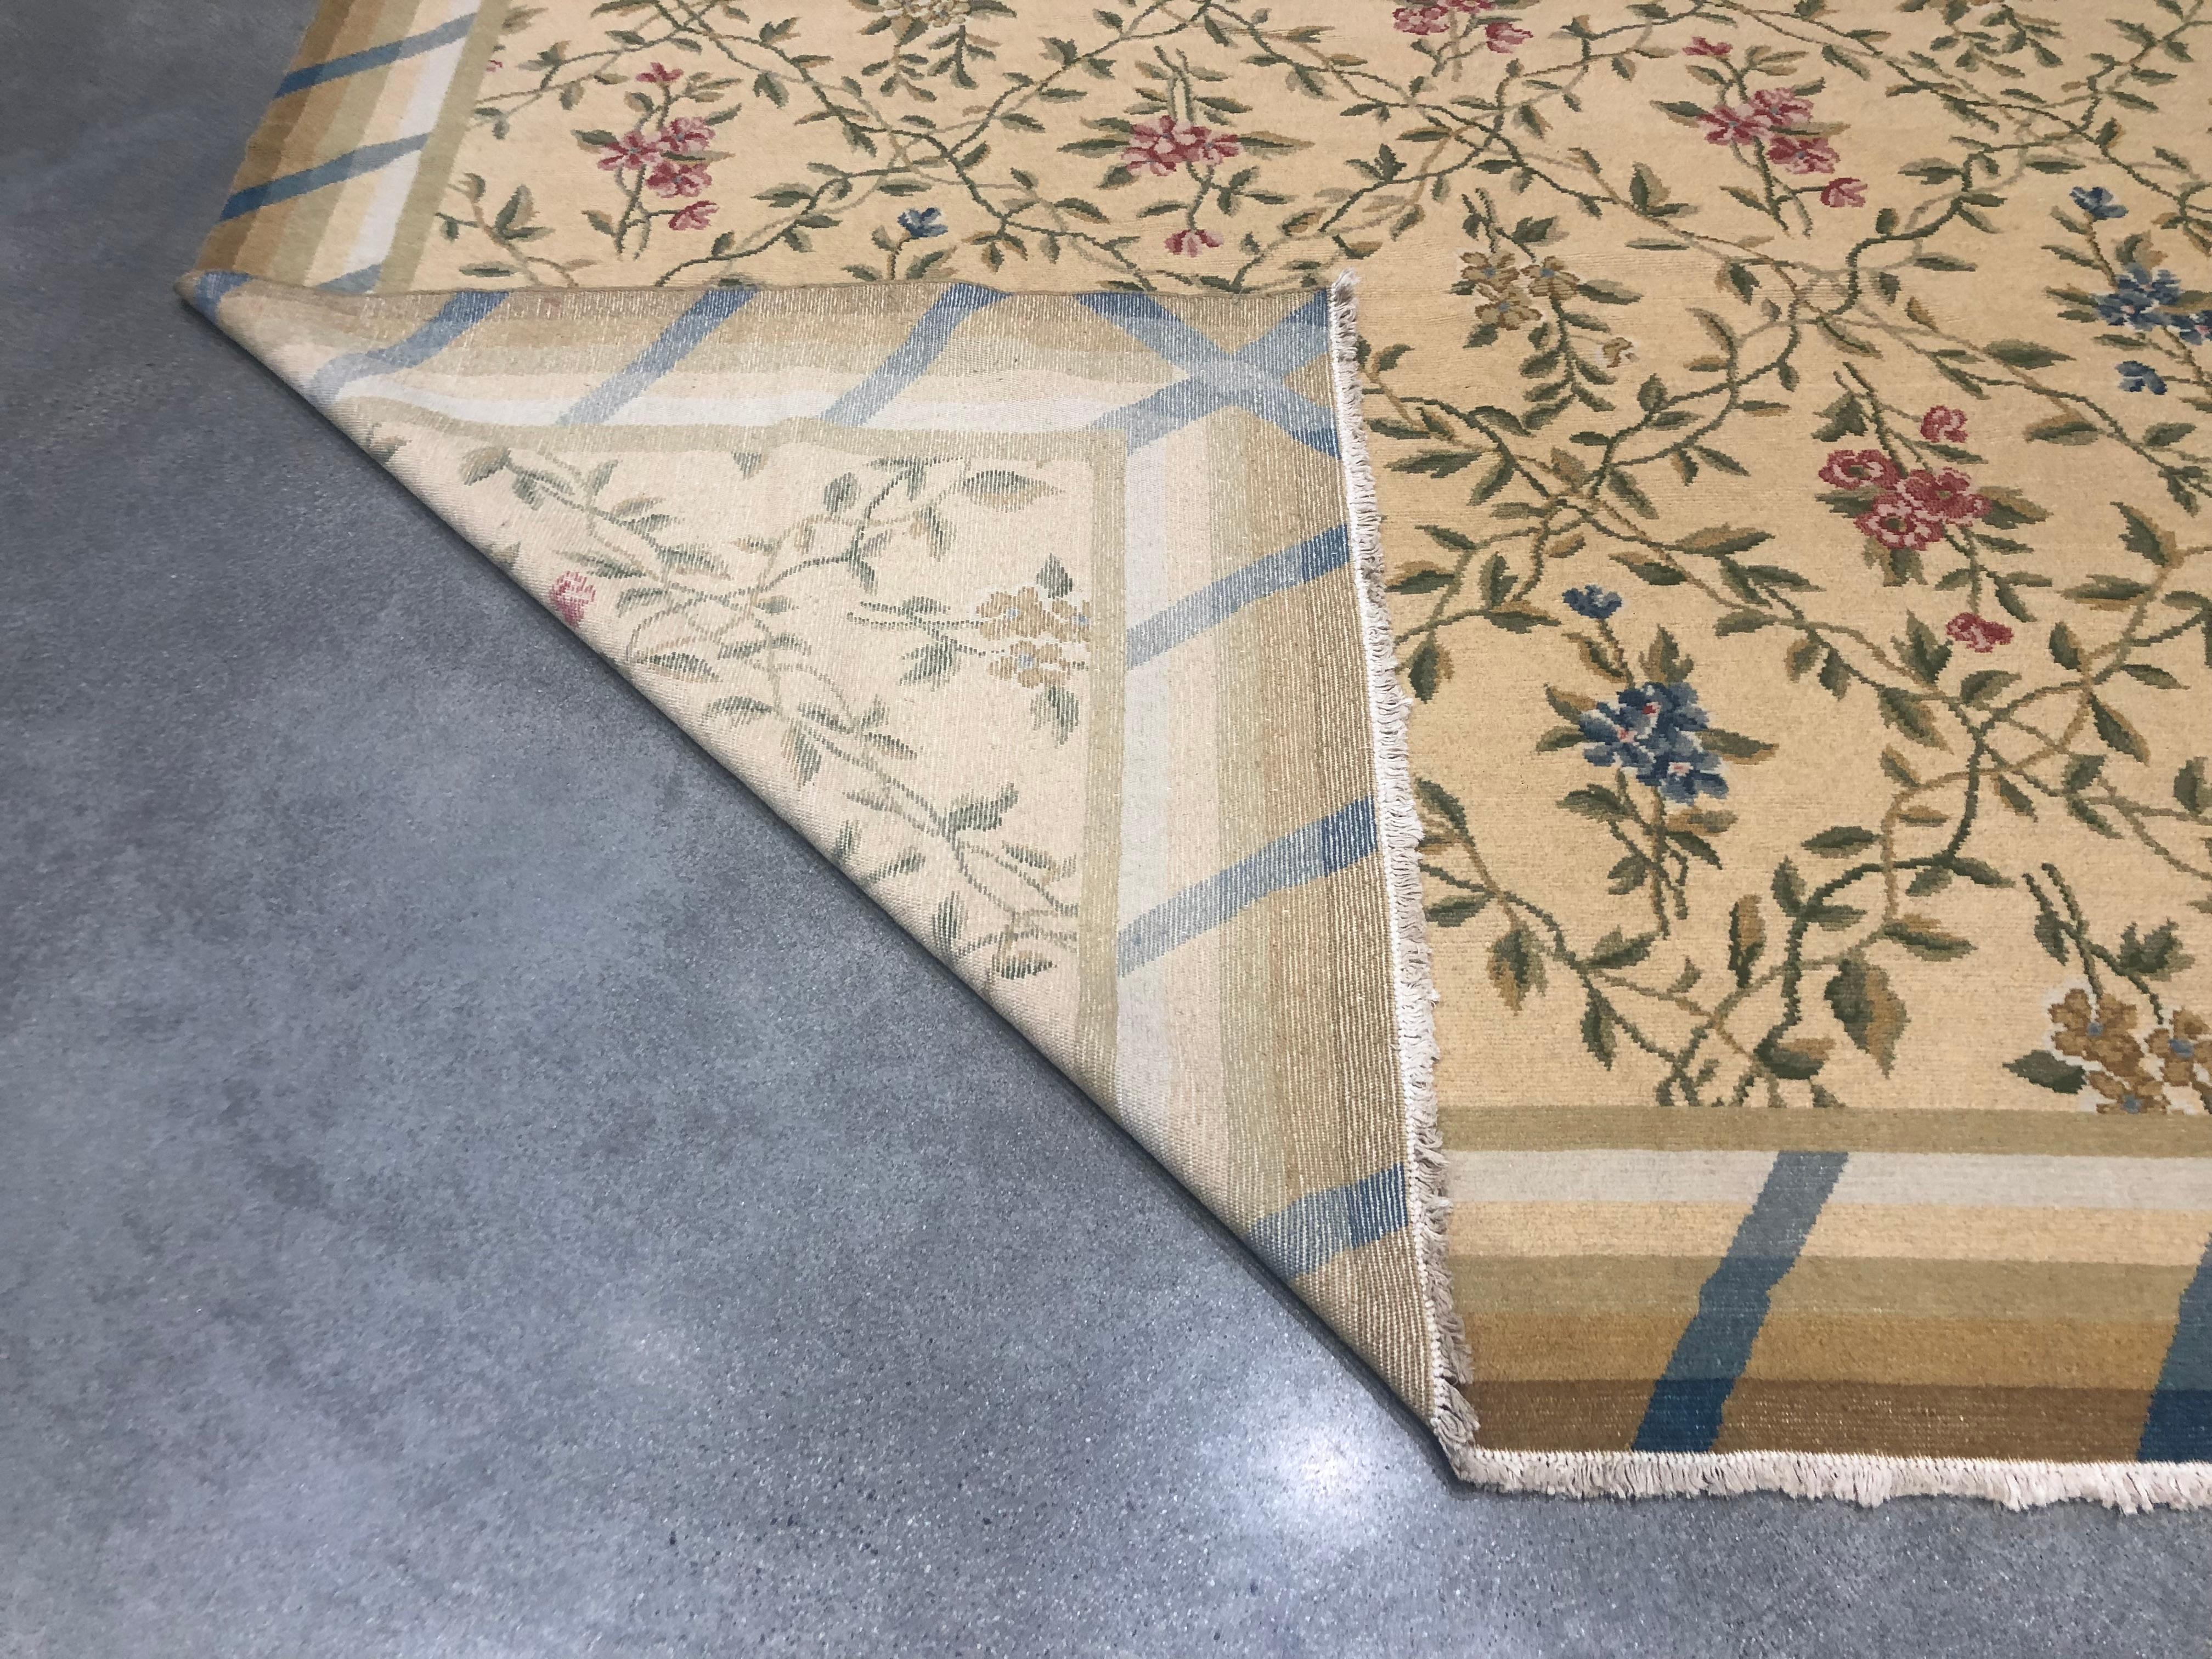 Contemporary meets traditional in this handmade Bassarabian area rug. In the center pane, a traditional floral print with blue, red and gold sprays against a field of gold; around the edges, cool blue lines cross similar warm gold tones. Hand